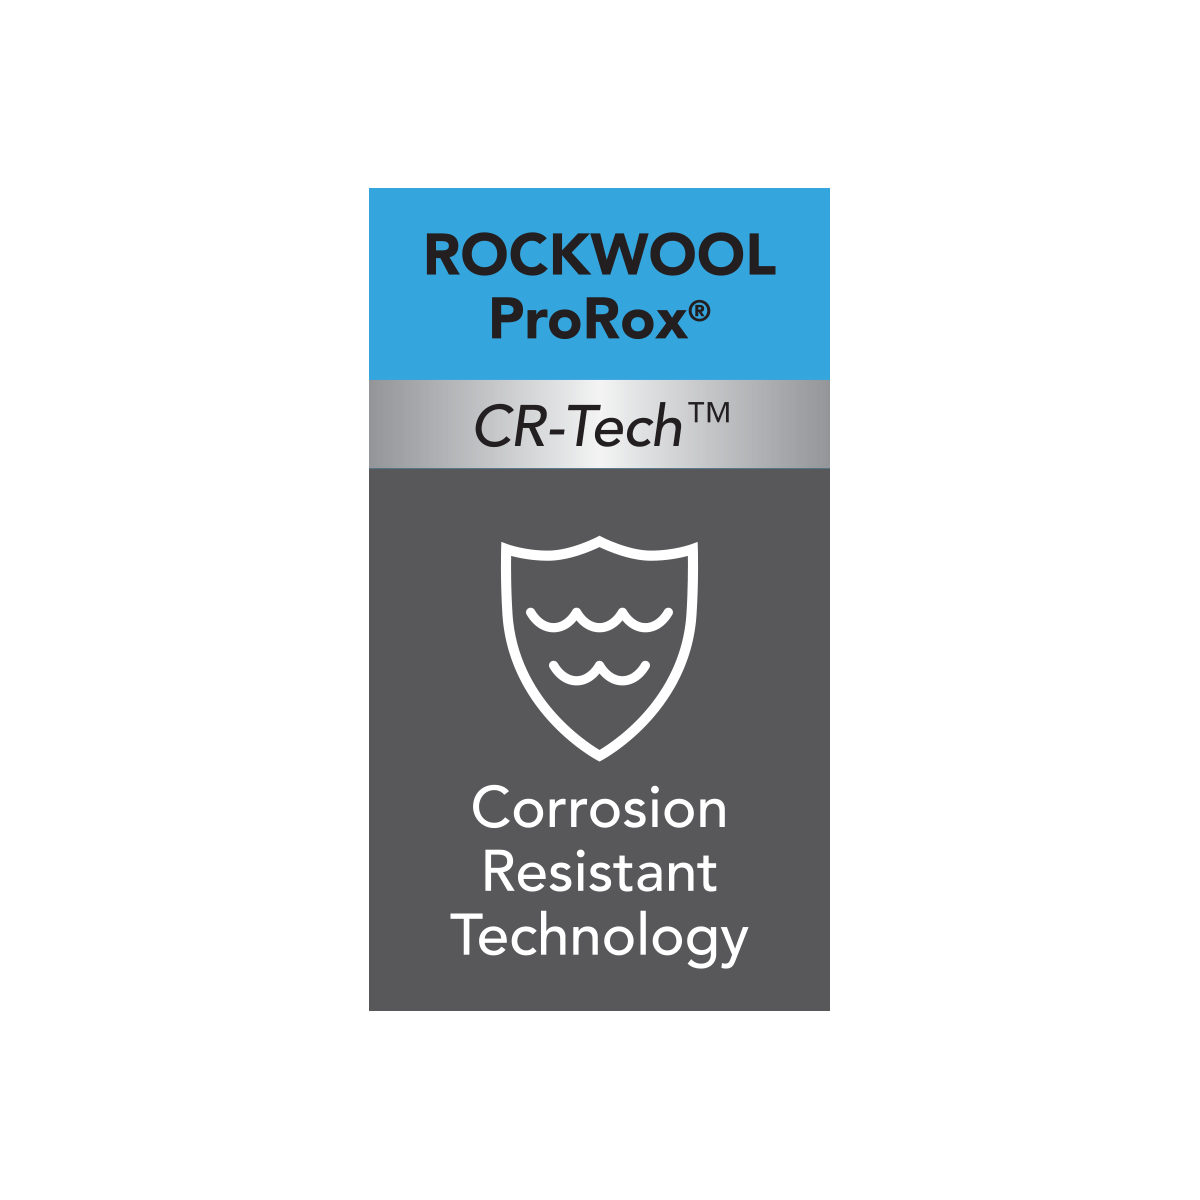 Corrosion Resistant Technology tag icon